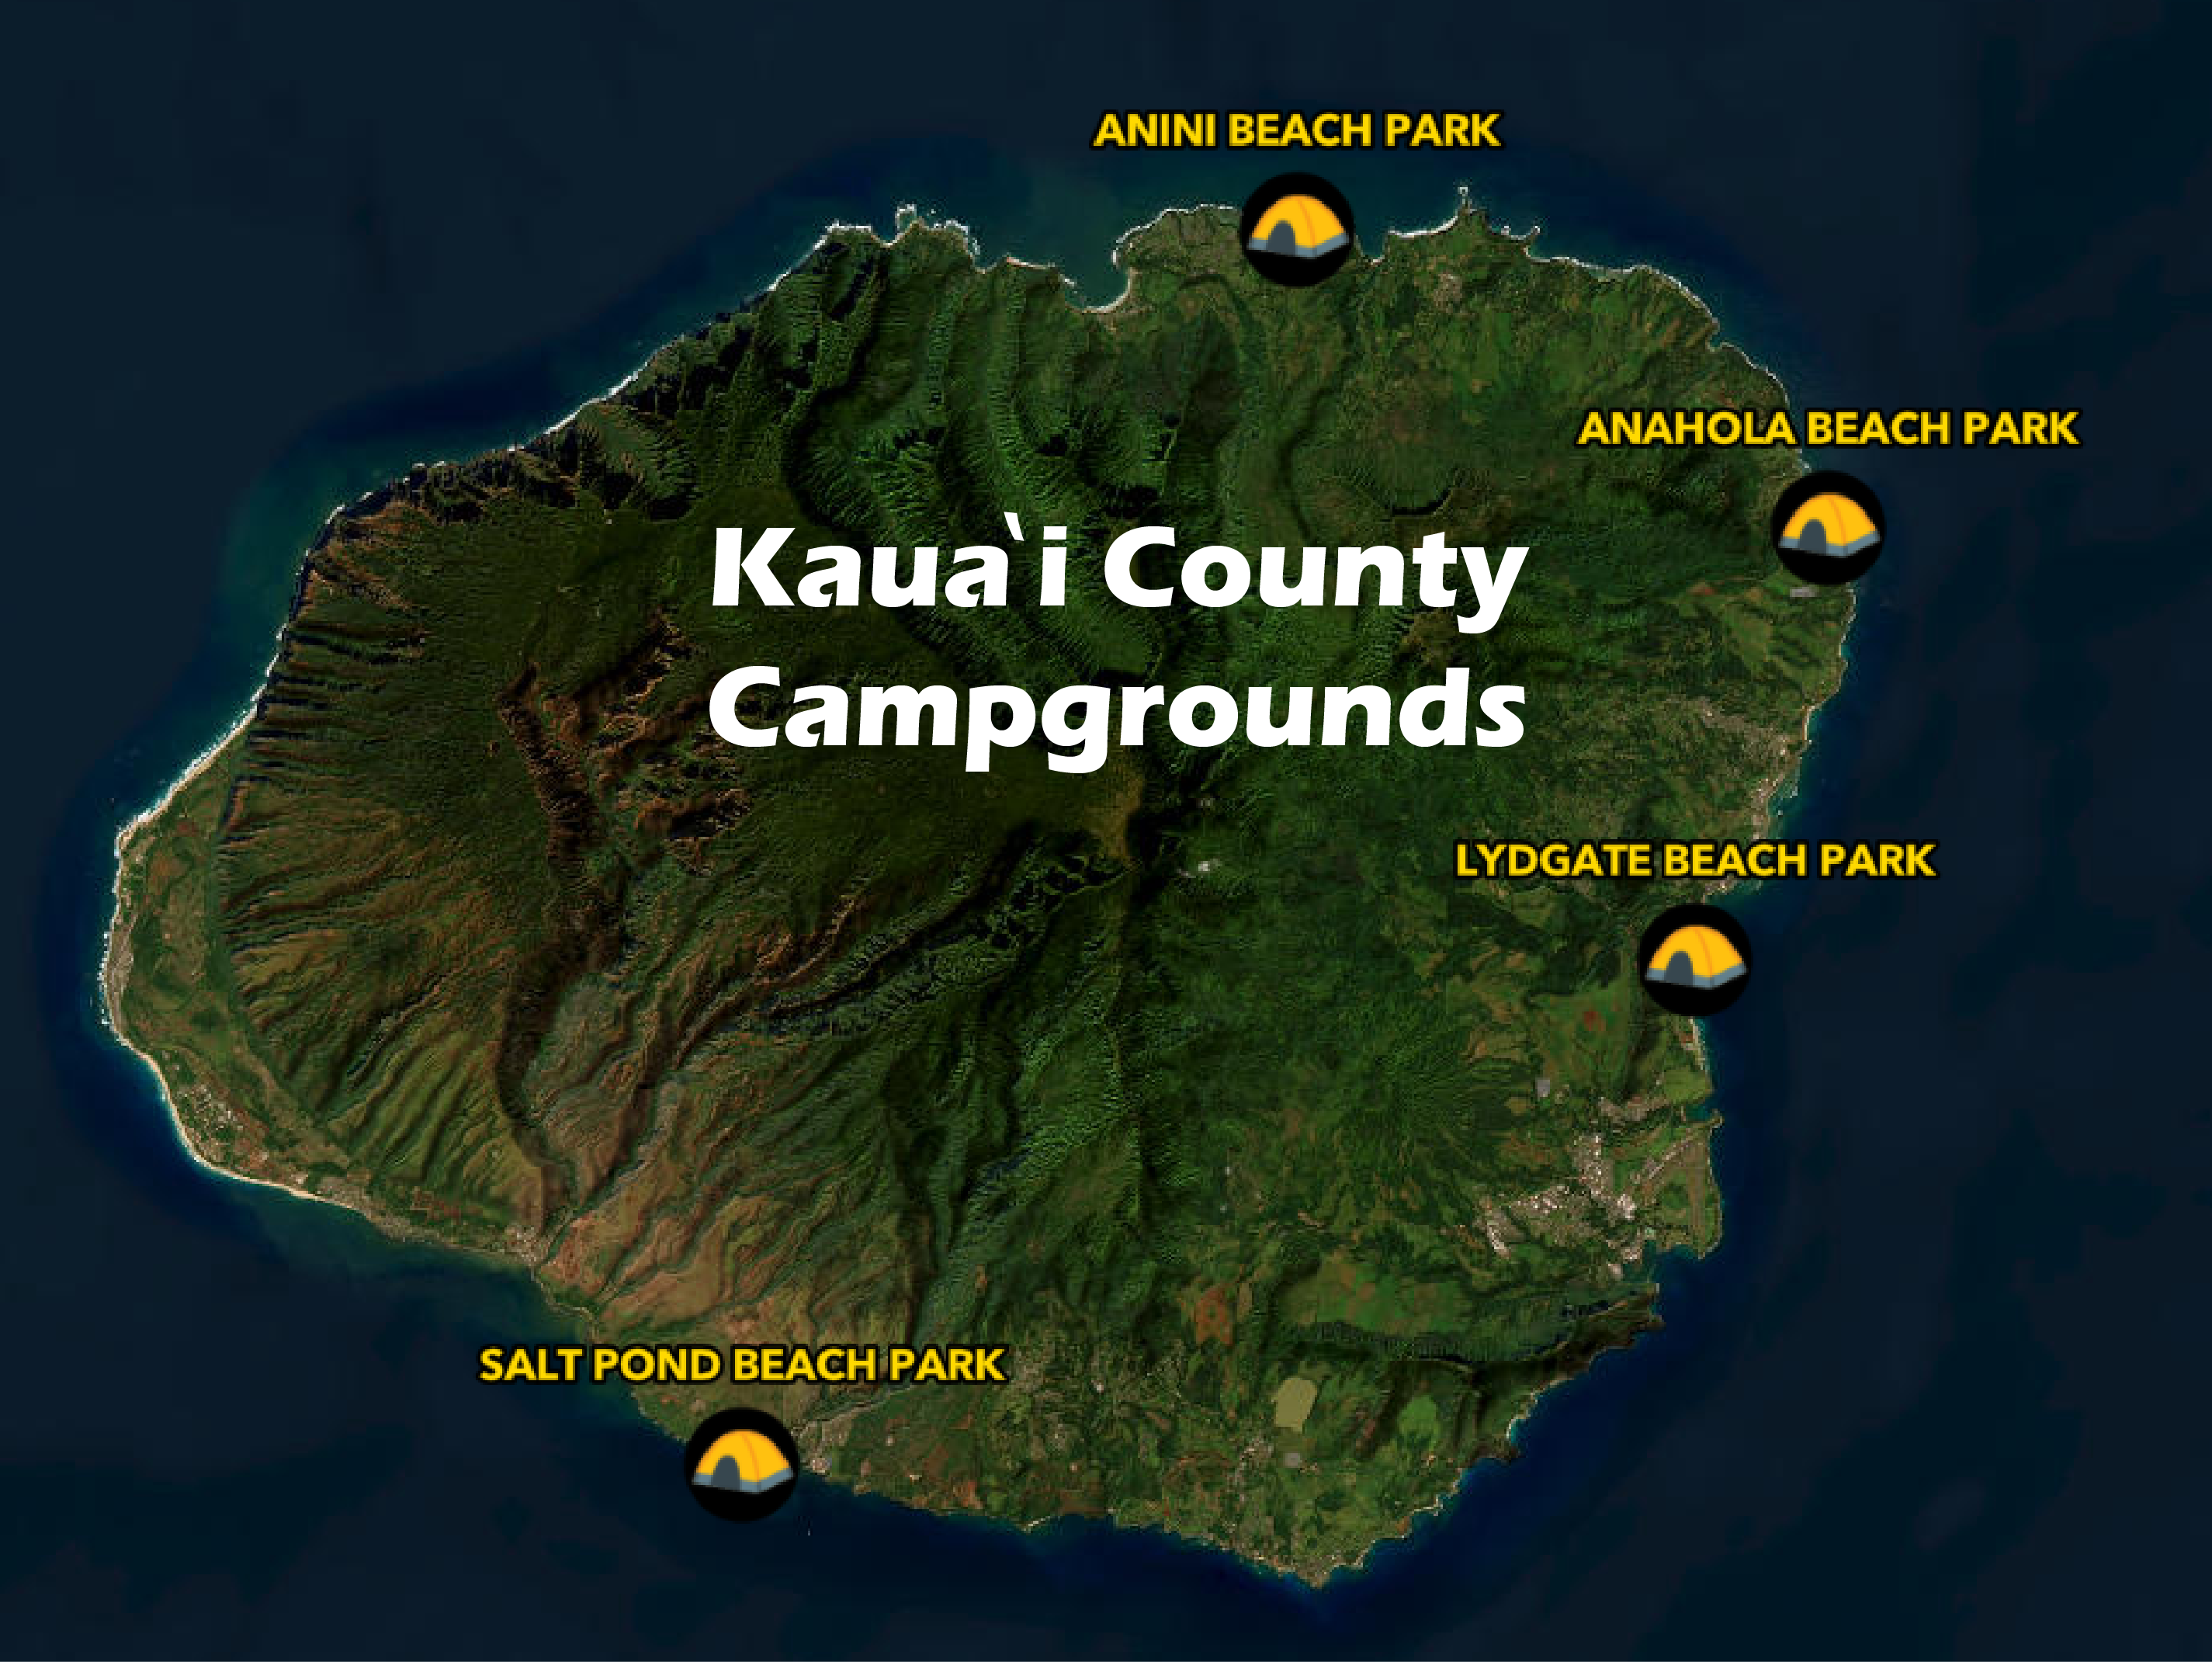 Kauai Island Campgrounds. Four campgrounds with images of tents where they are located. Campground names from top to bottom are Anini, Anahola, Lydgate, and Salt Pond.